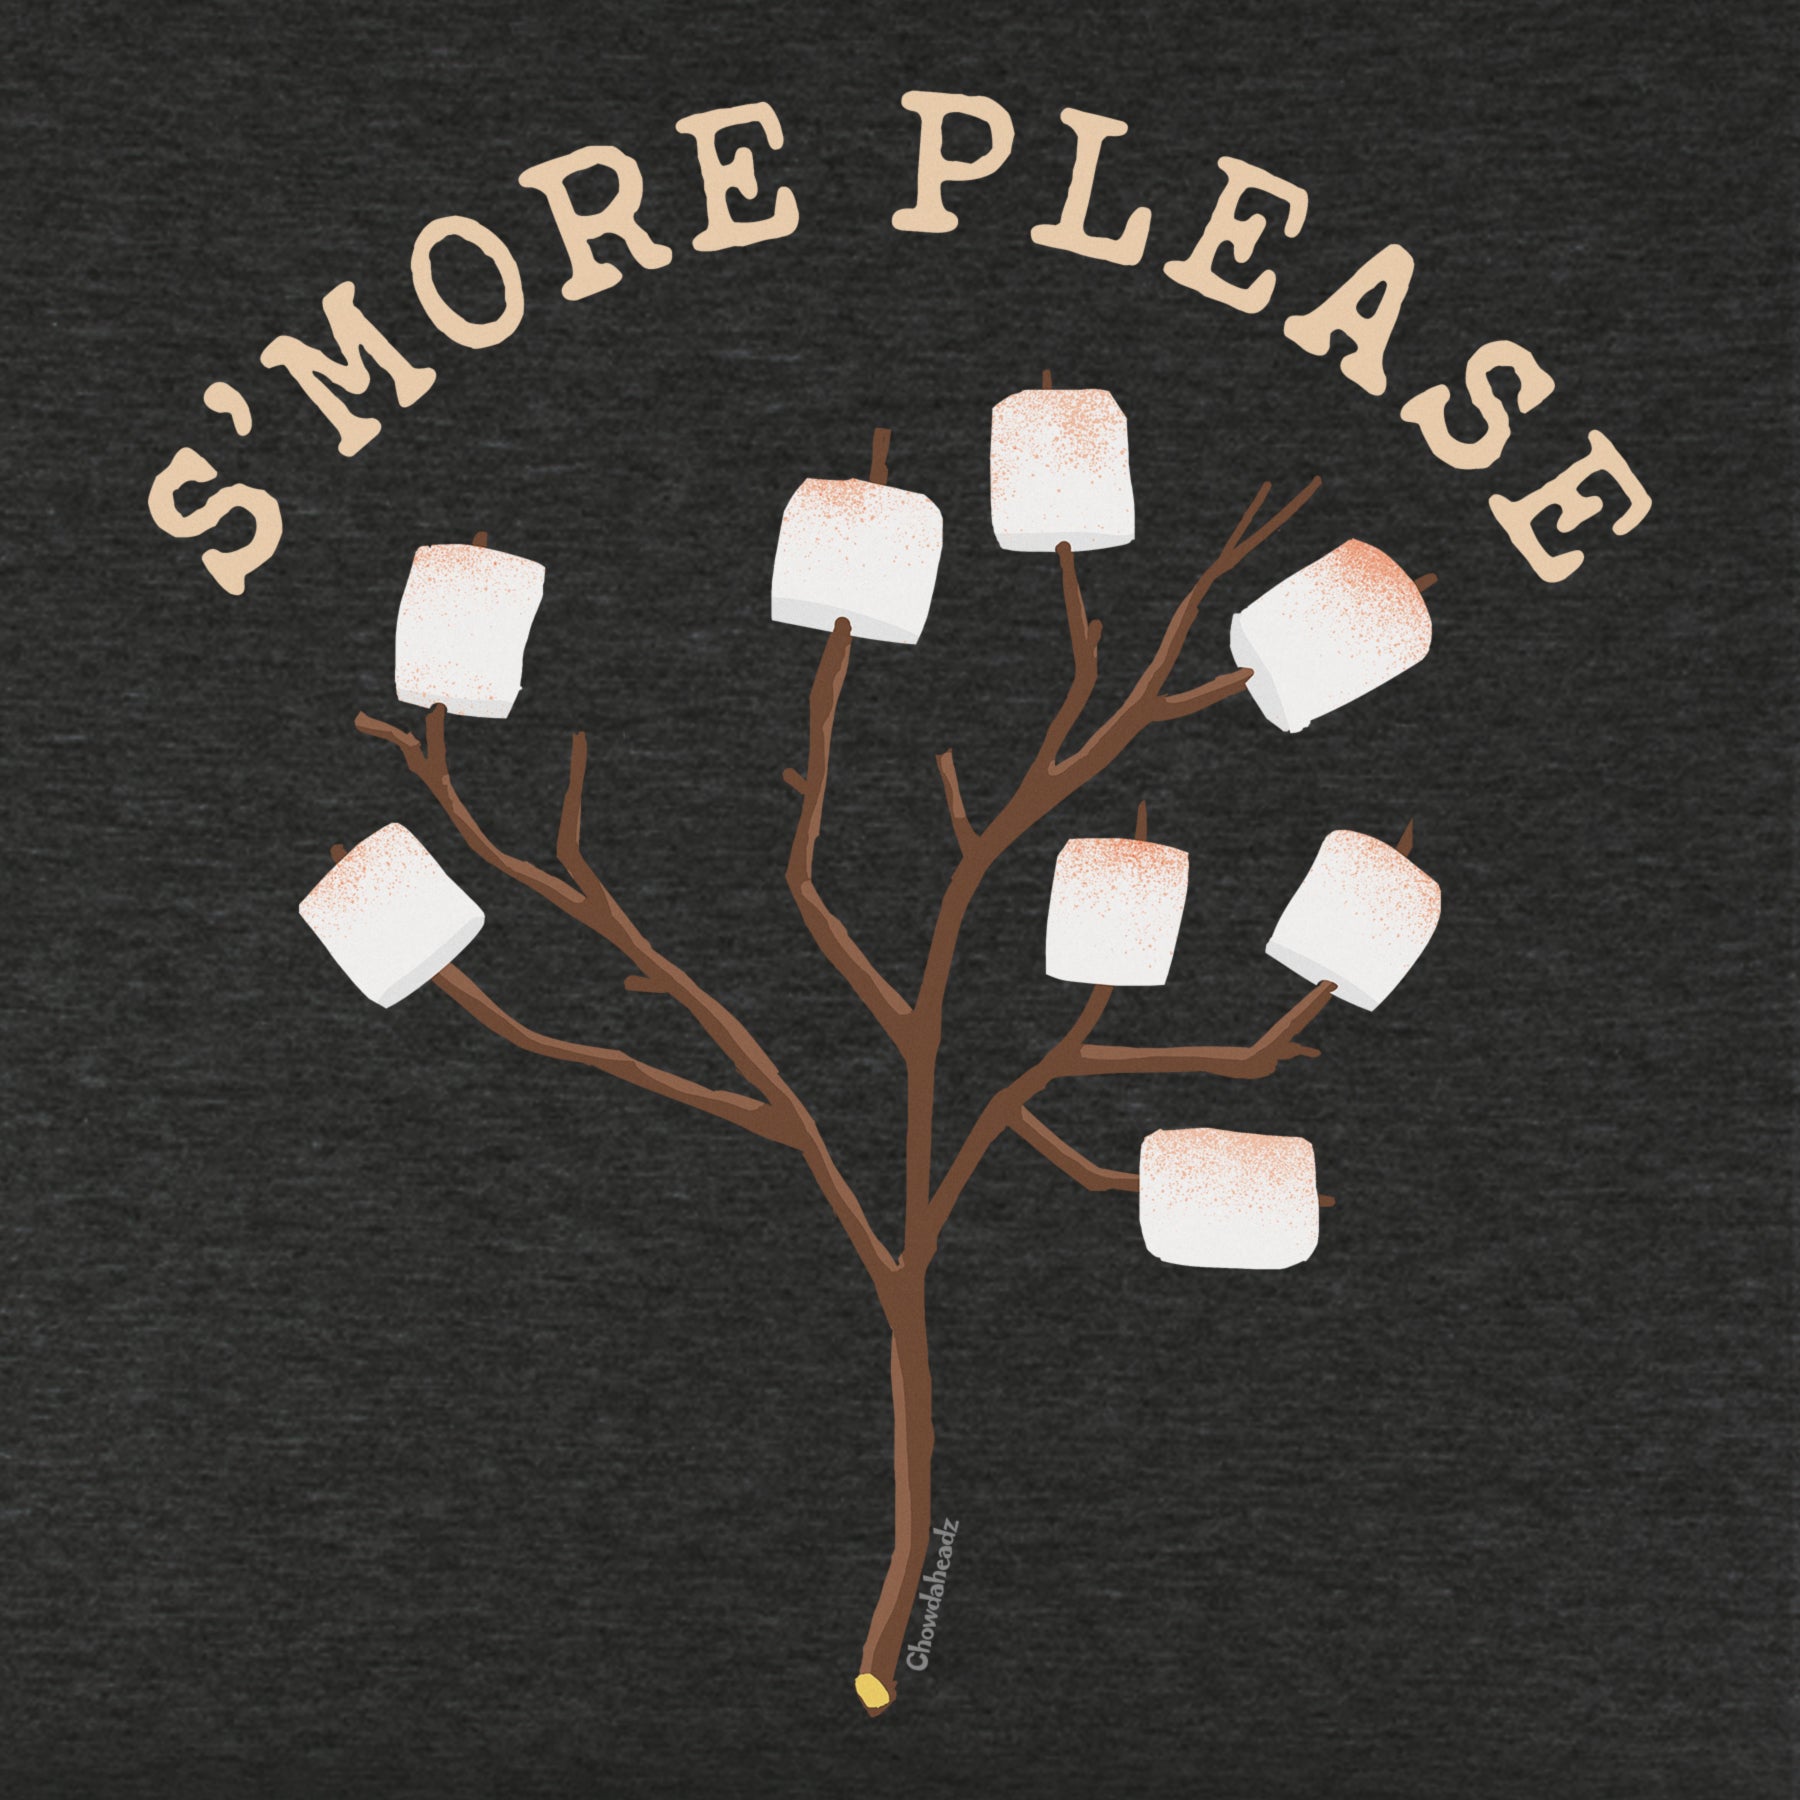 S'More Please Youth T-Shirt - Chowdaheadz